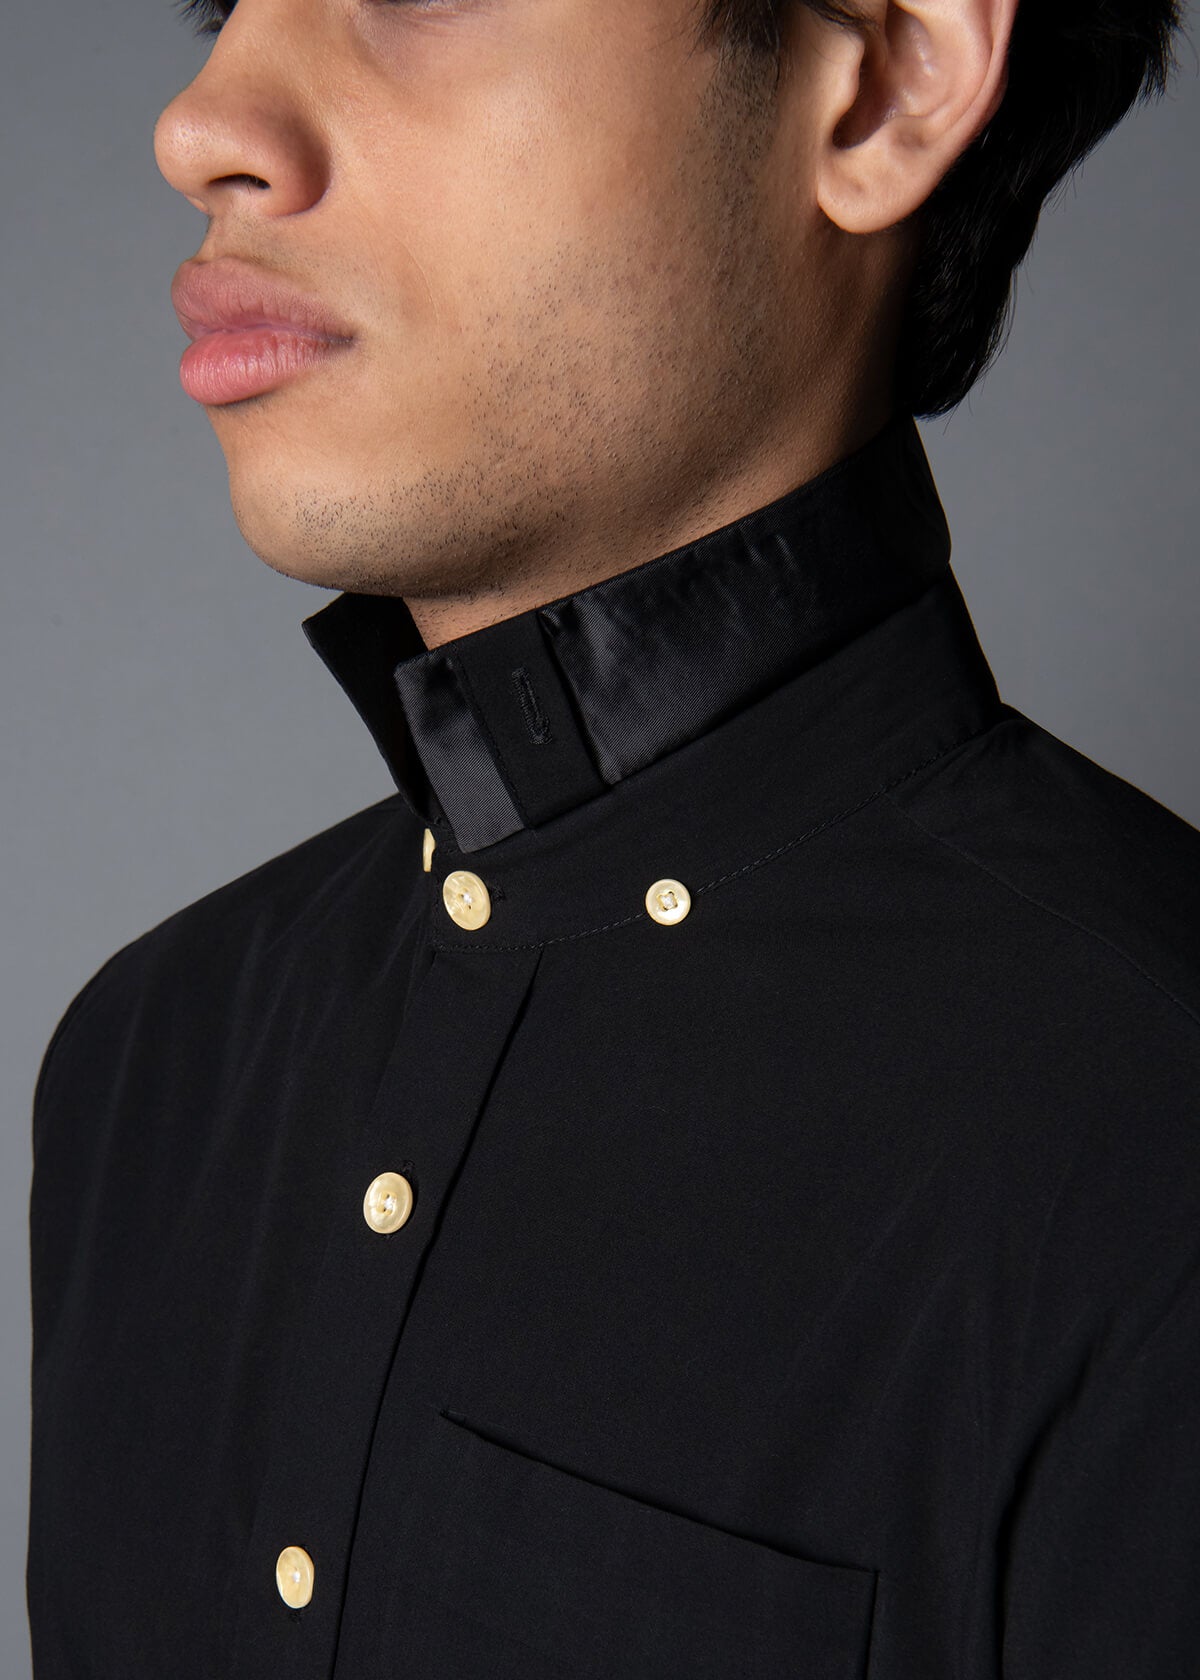 cotton and modal black shirt for men